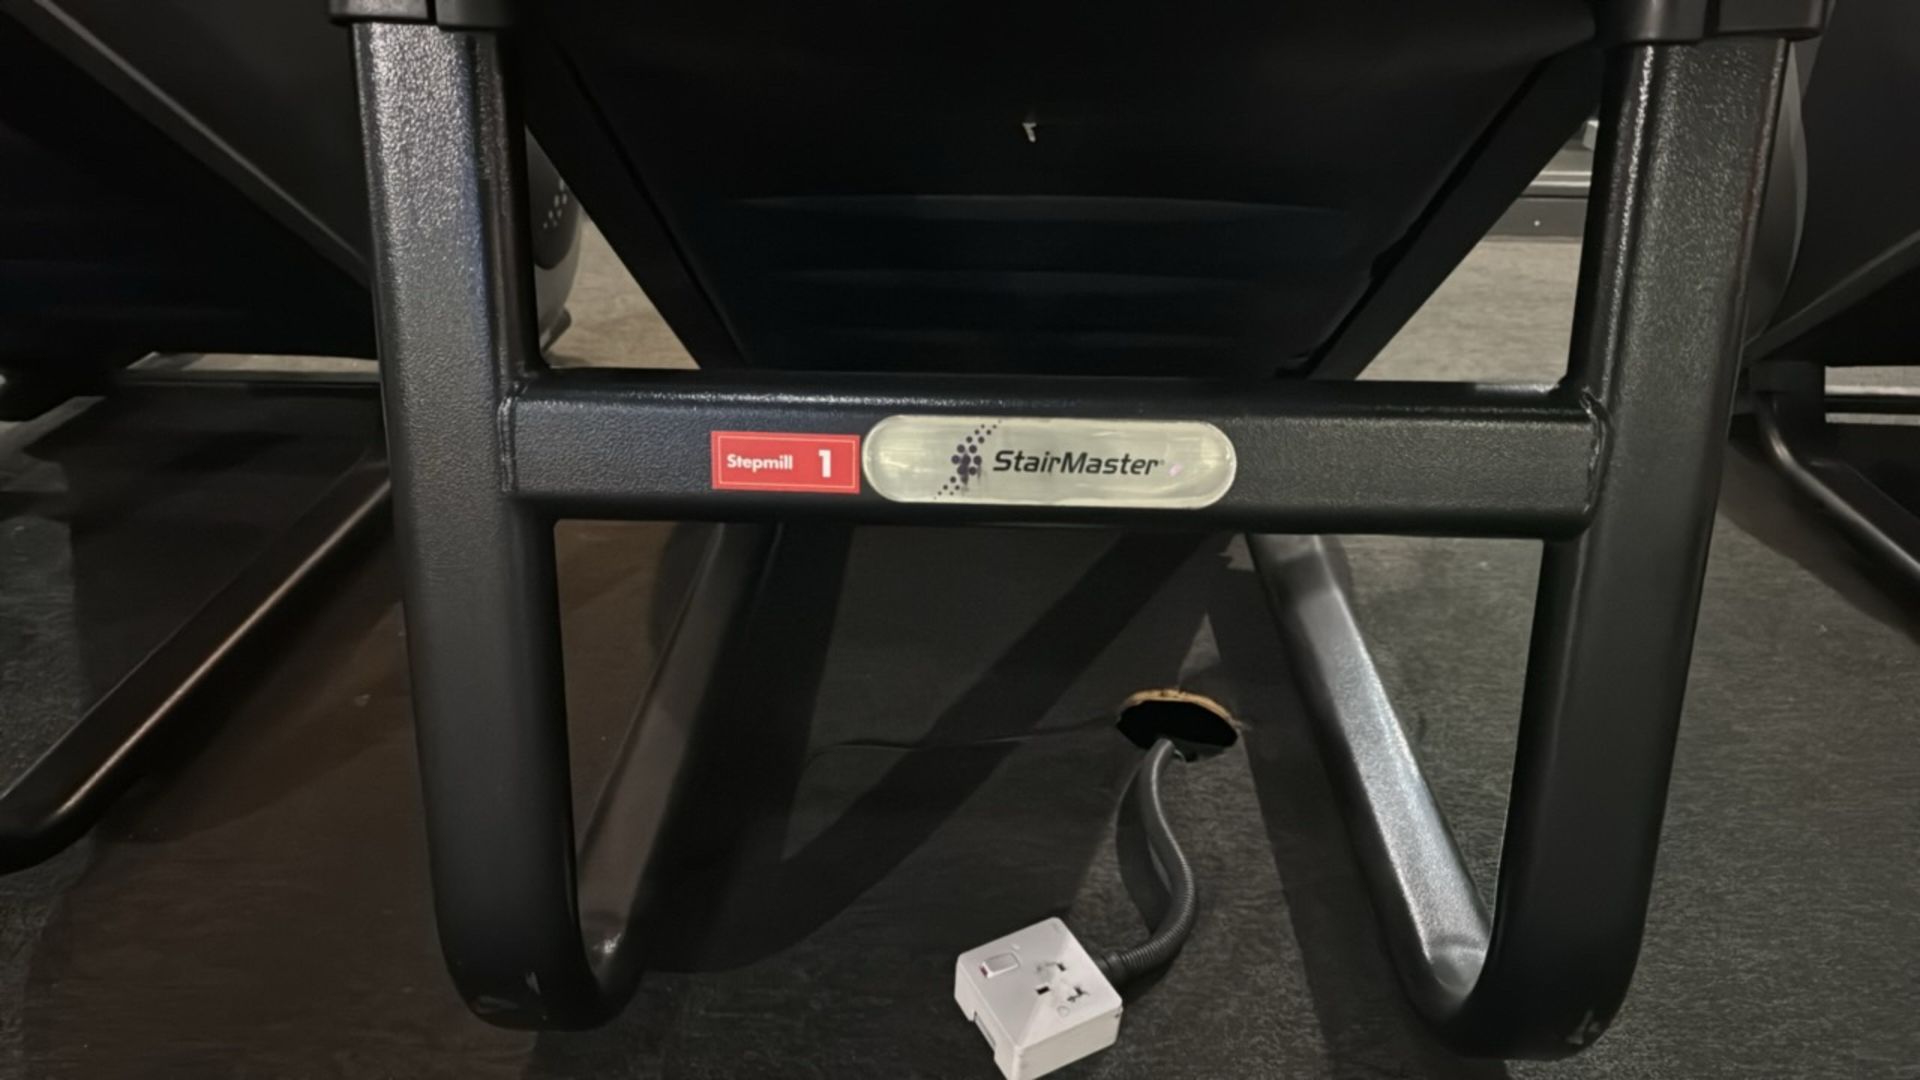 Stairmaster - Image 2 of 5